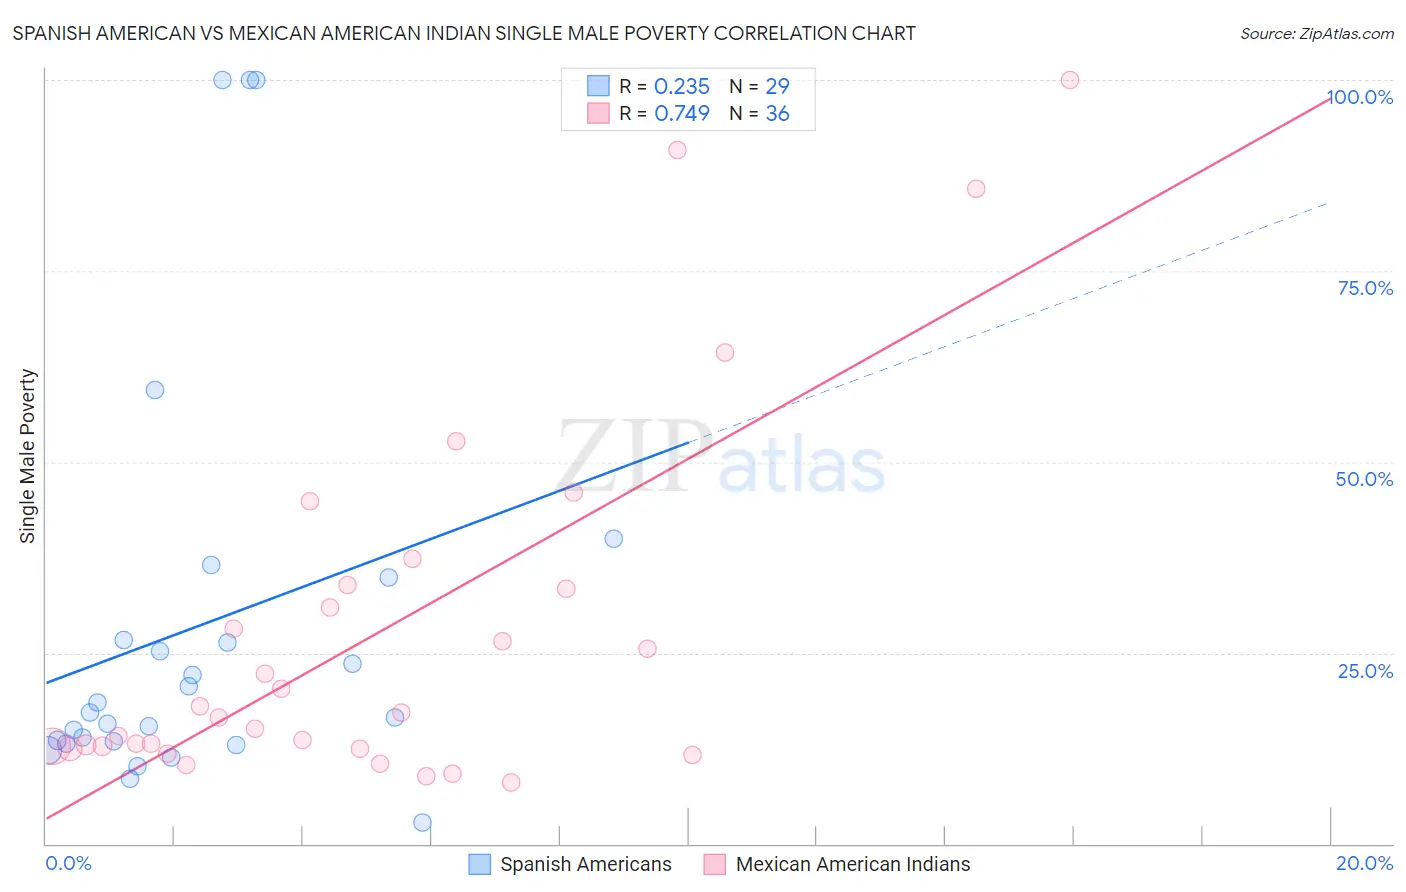 Spanish American vs Mexican American Indian Single Male Poverty